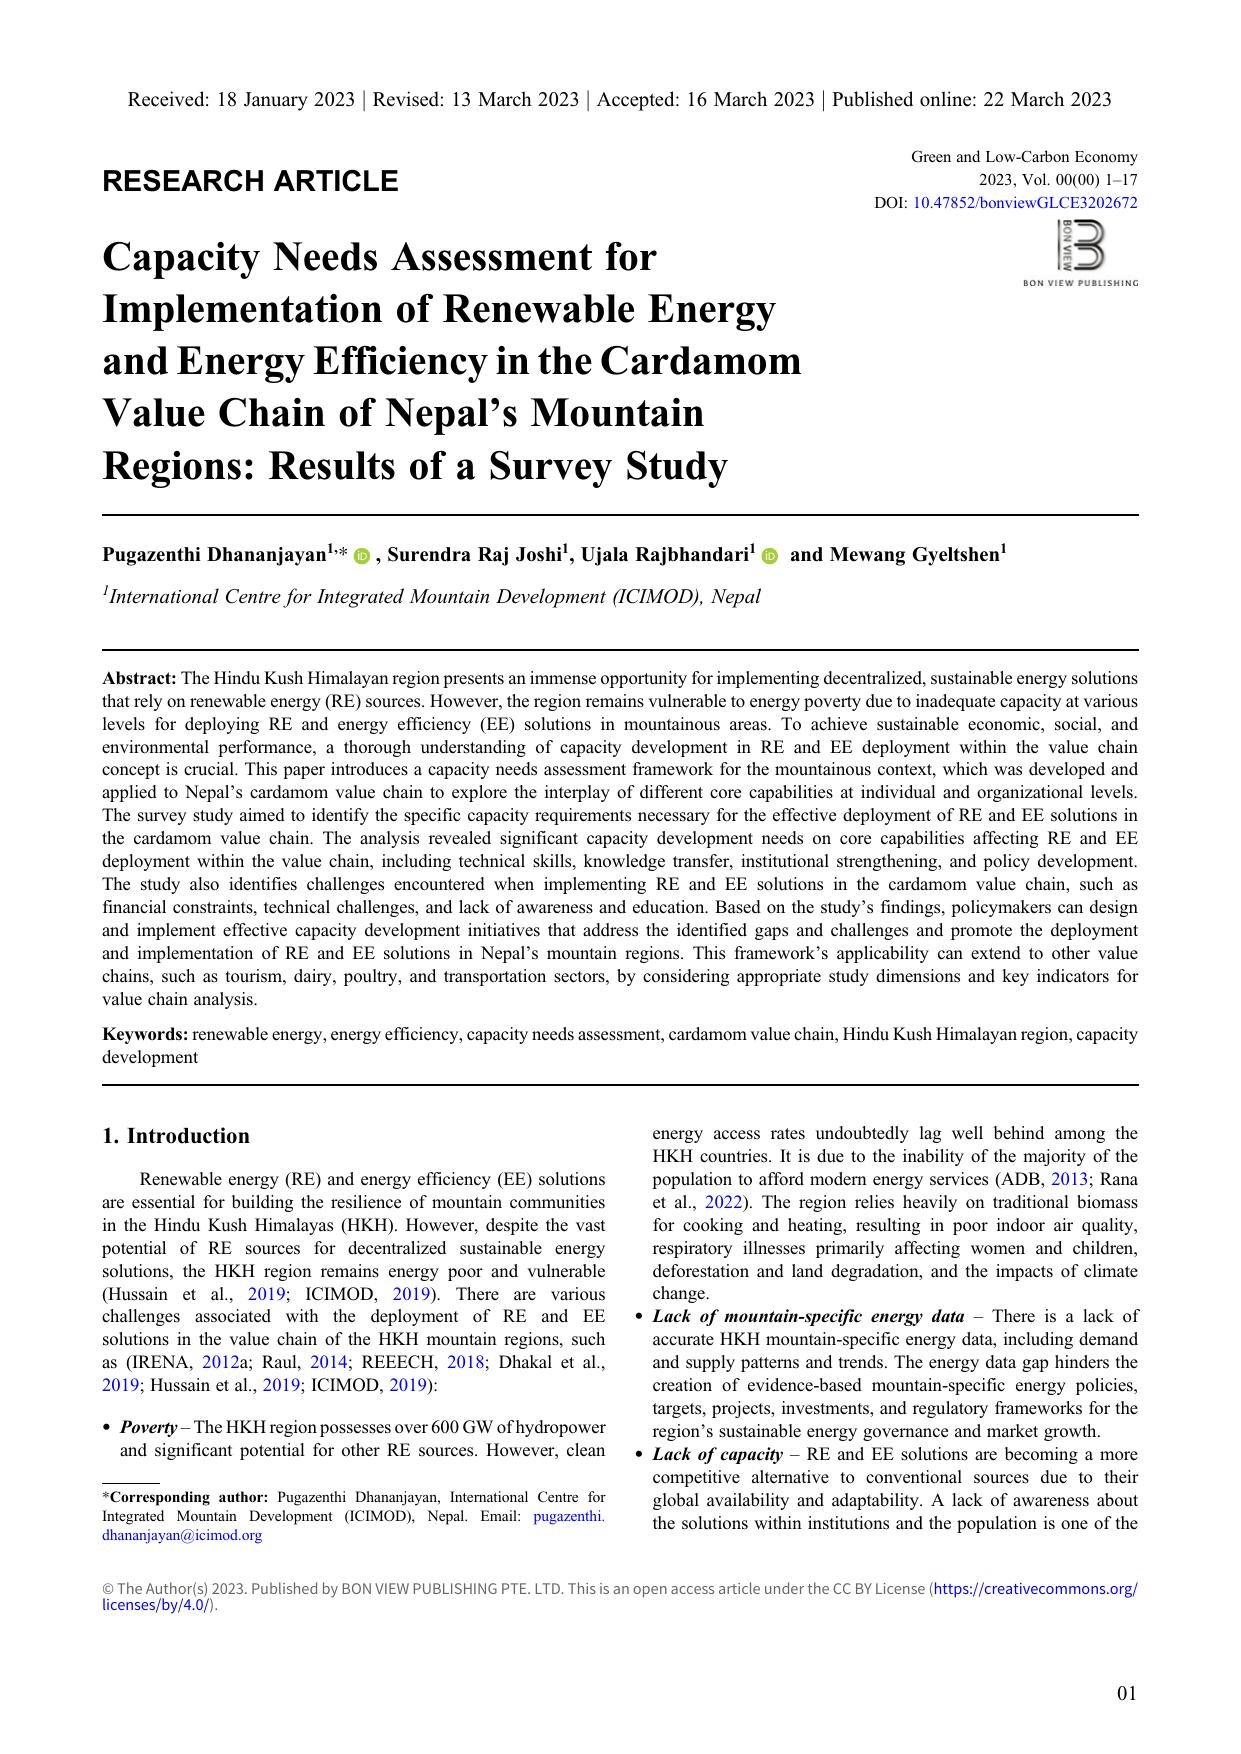 Capacity Needs Assessment for Implementation of Renewable Energy and Energy Efficiency in the Cardamom Value Chain of Nepal's Mountain Regions: Results of a Survey Study